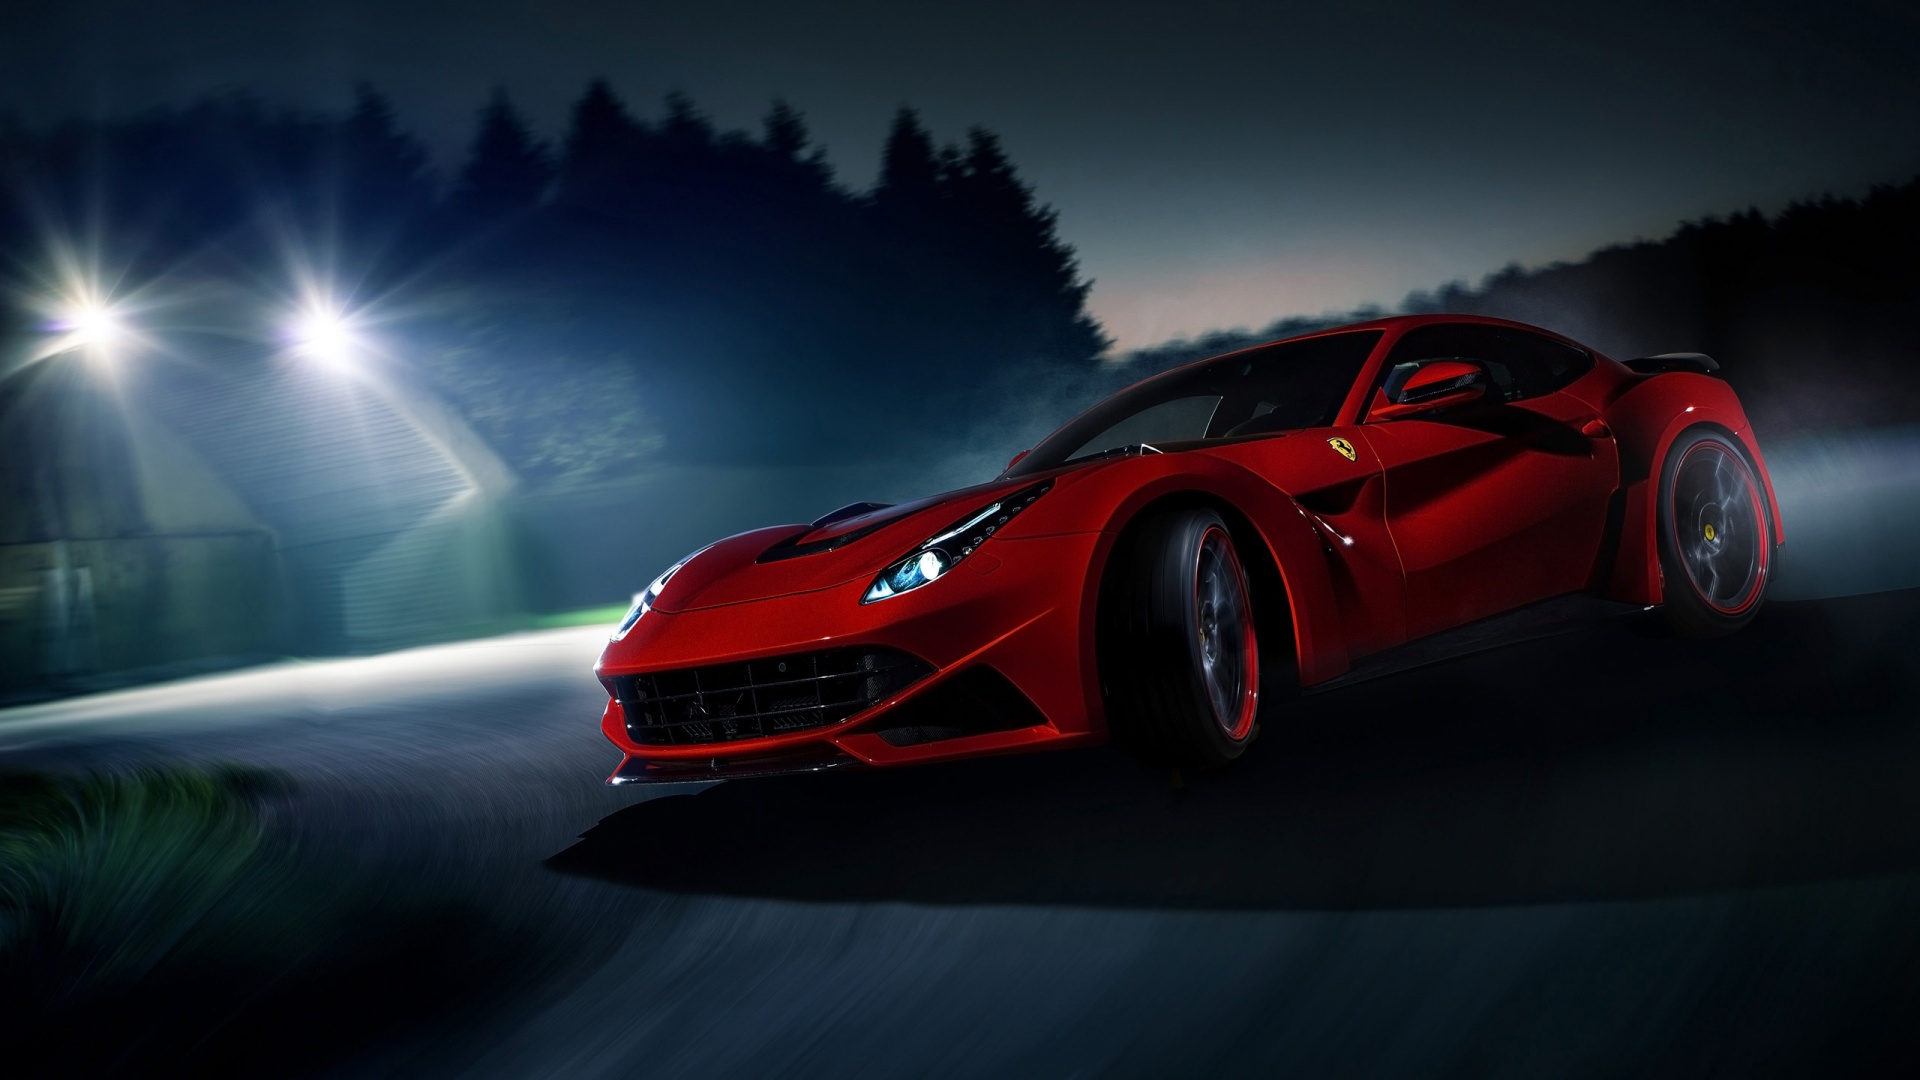 download Cars Image Wallpapers